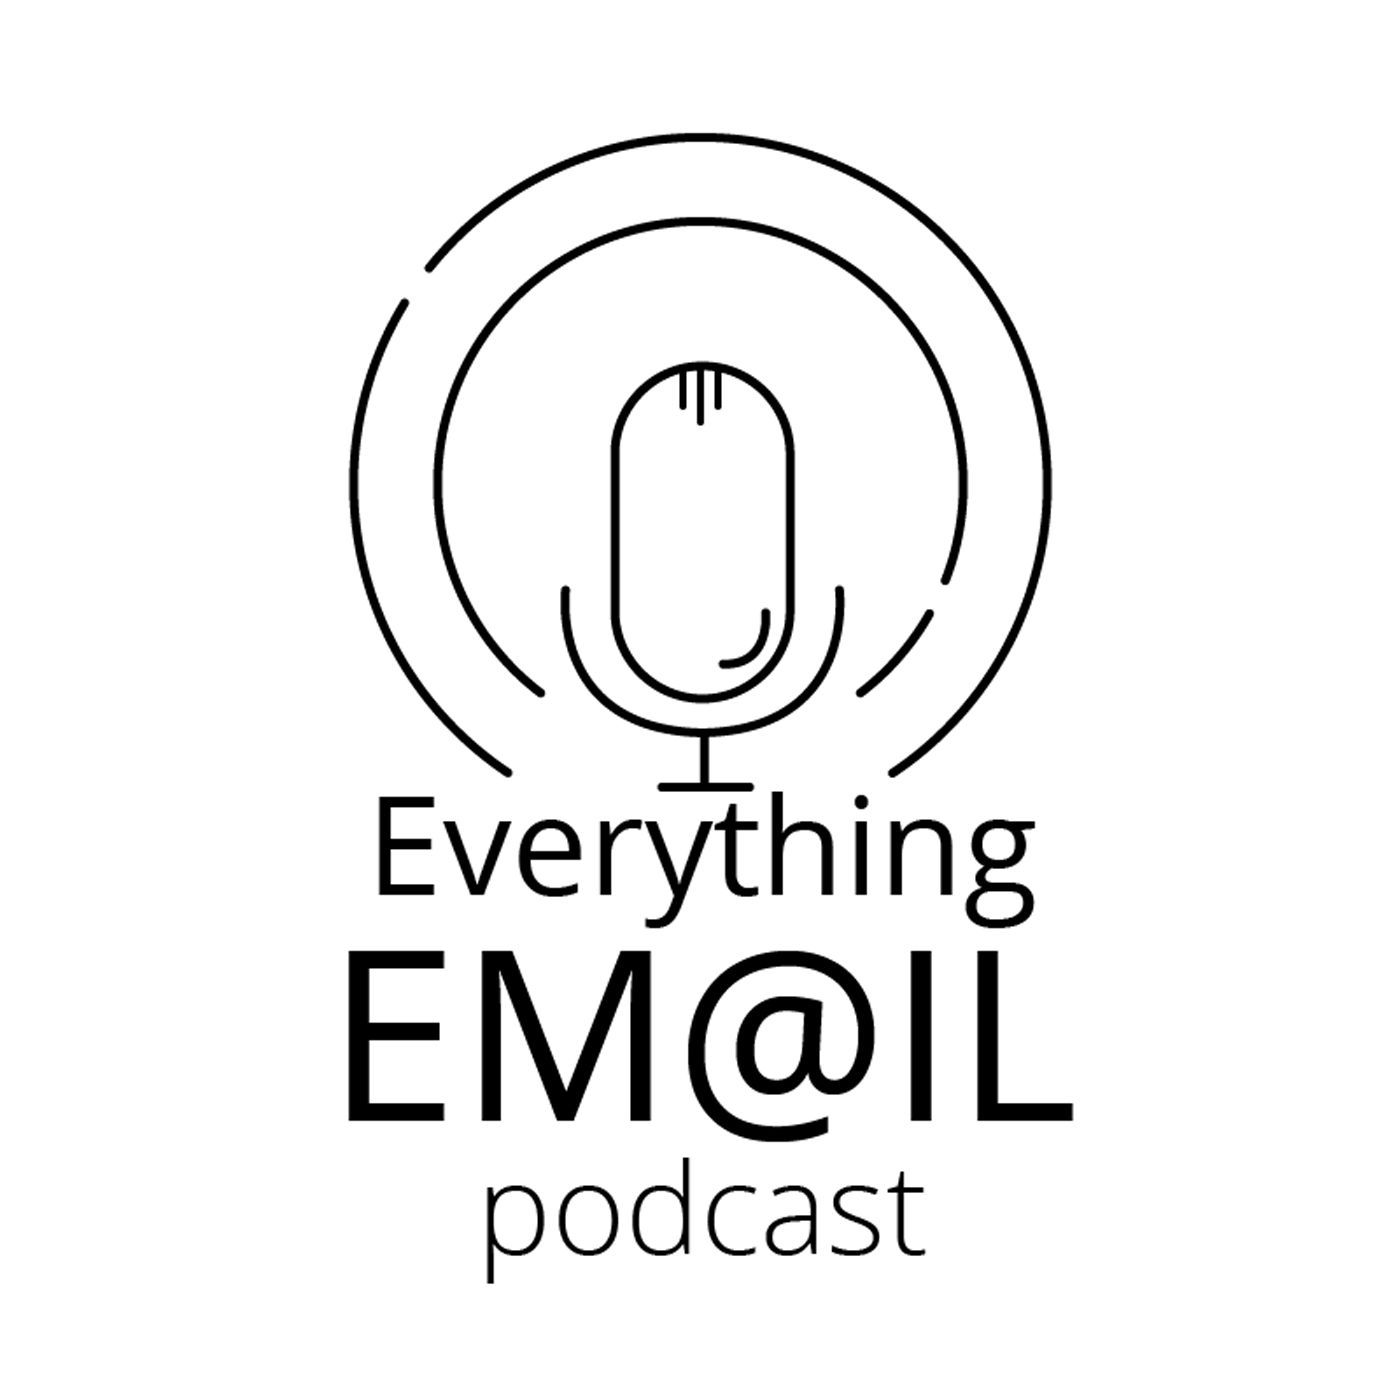 Everything Email Podcast